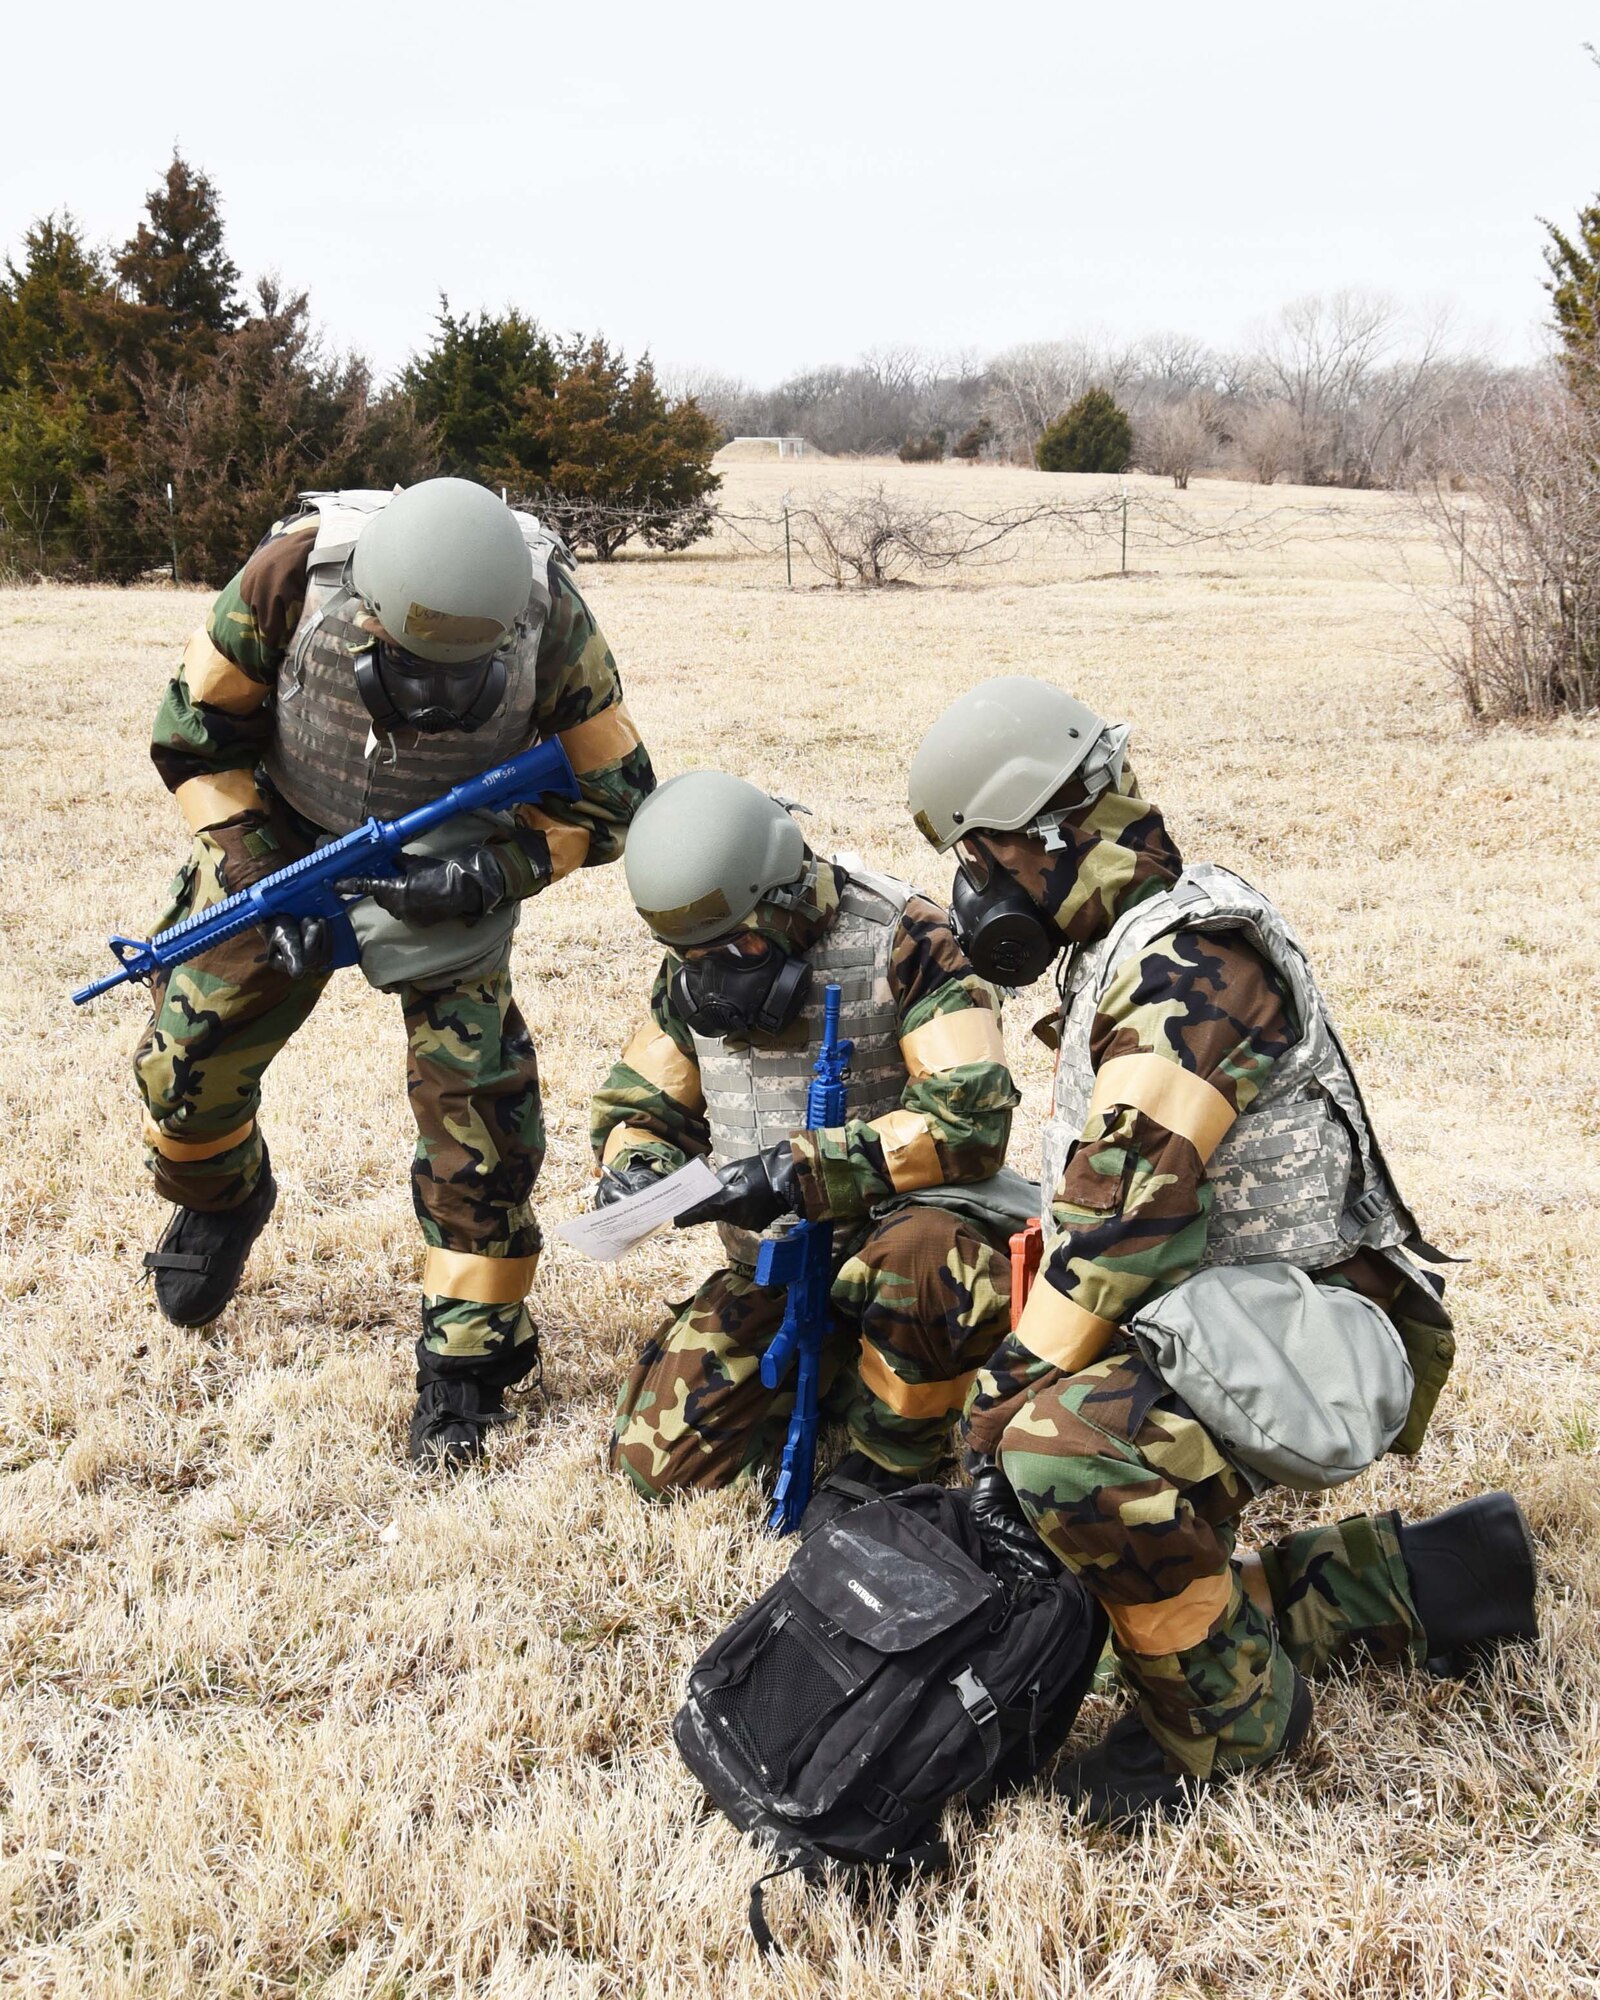 Reserve Citizen Airmen of the 931st Air Refueling Wing sweep the field for "land mines" during in an Annual Readiness Assessment March 2, 2019, McConnell Air Force Base, Kan. The exercise consisted of deployment and redeployment of troops to and from an assigned location, the performance of self-aid and buddy care (SABC), contamination avoidance, warning and alarm signals, reporting, and the performance of protective postures (MOPP).  (U.S. Air Force photo by Tech. Sgt. Abigail Klein)